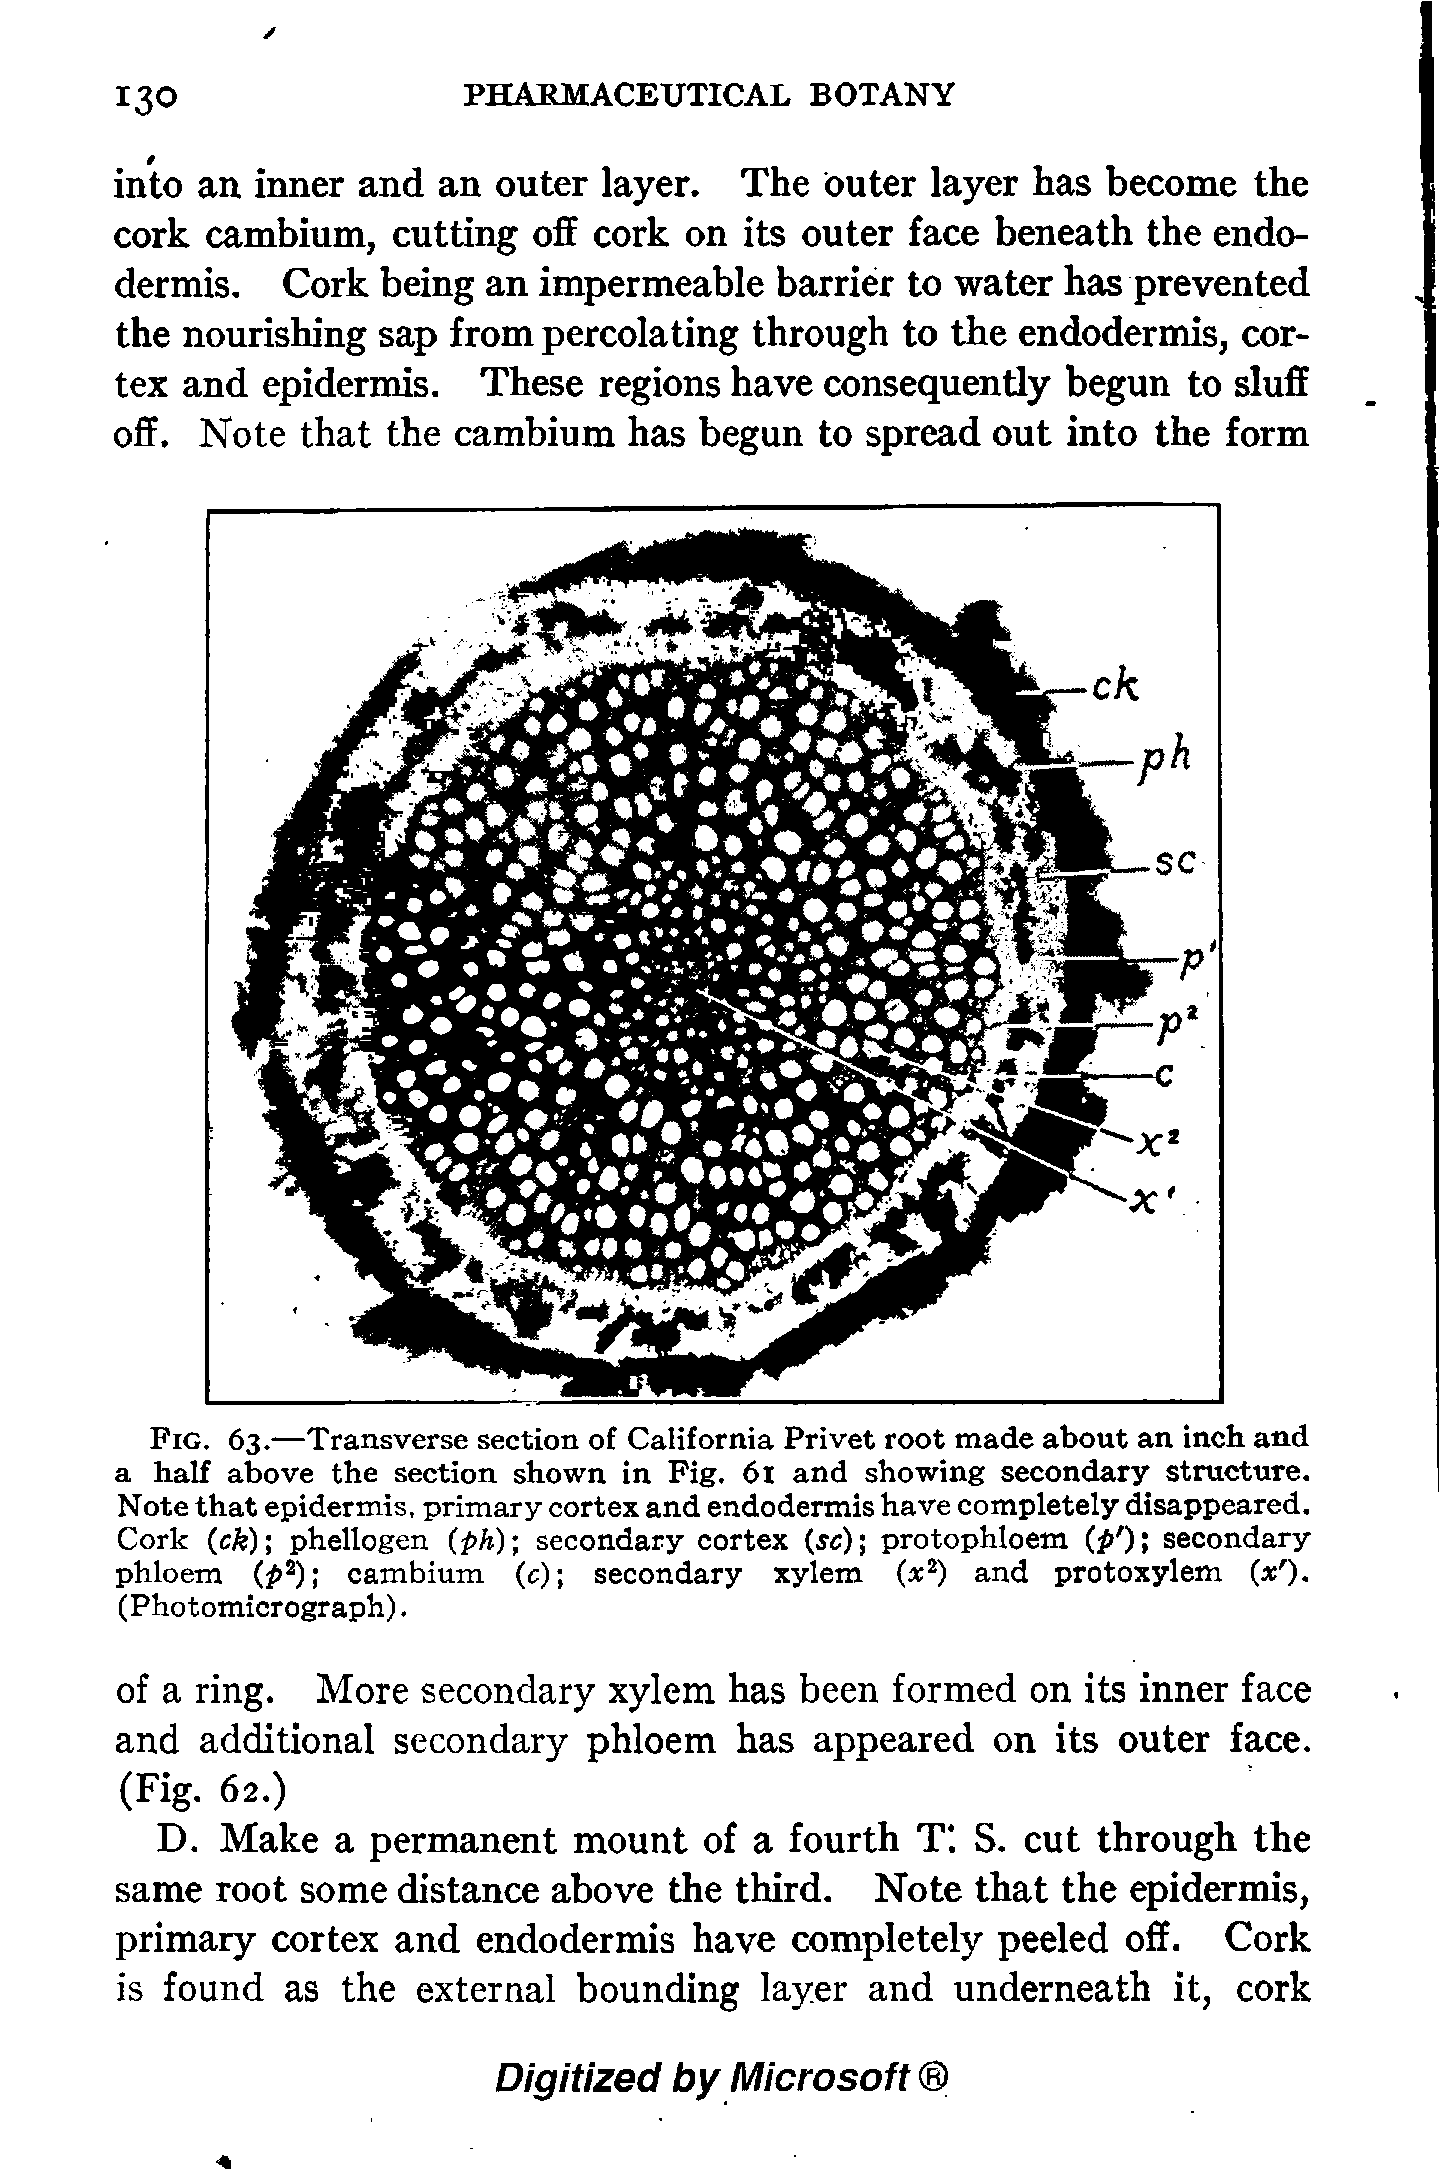 Fig. 63.—Transverse section of California Privet root made about an inch and a half above the section shown in Pig. 6l and showing secondary structure. Note that epidermis, primary cortex and endodermis have completely disappeared. Cork (cfe) phellogen -ph) secondary cortex (rc) protophloem p ) secondary phloem cambium (c) secondary xylem ( ) and protoxylem ( ).